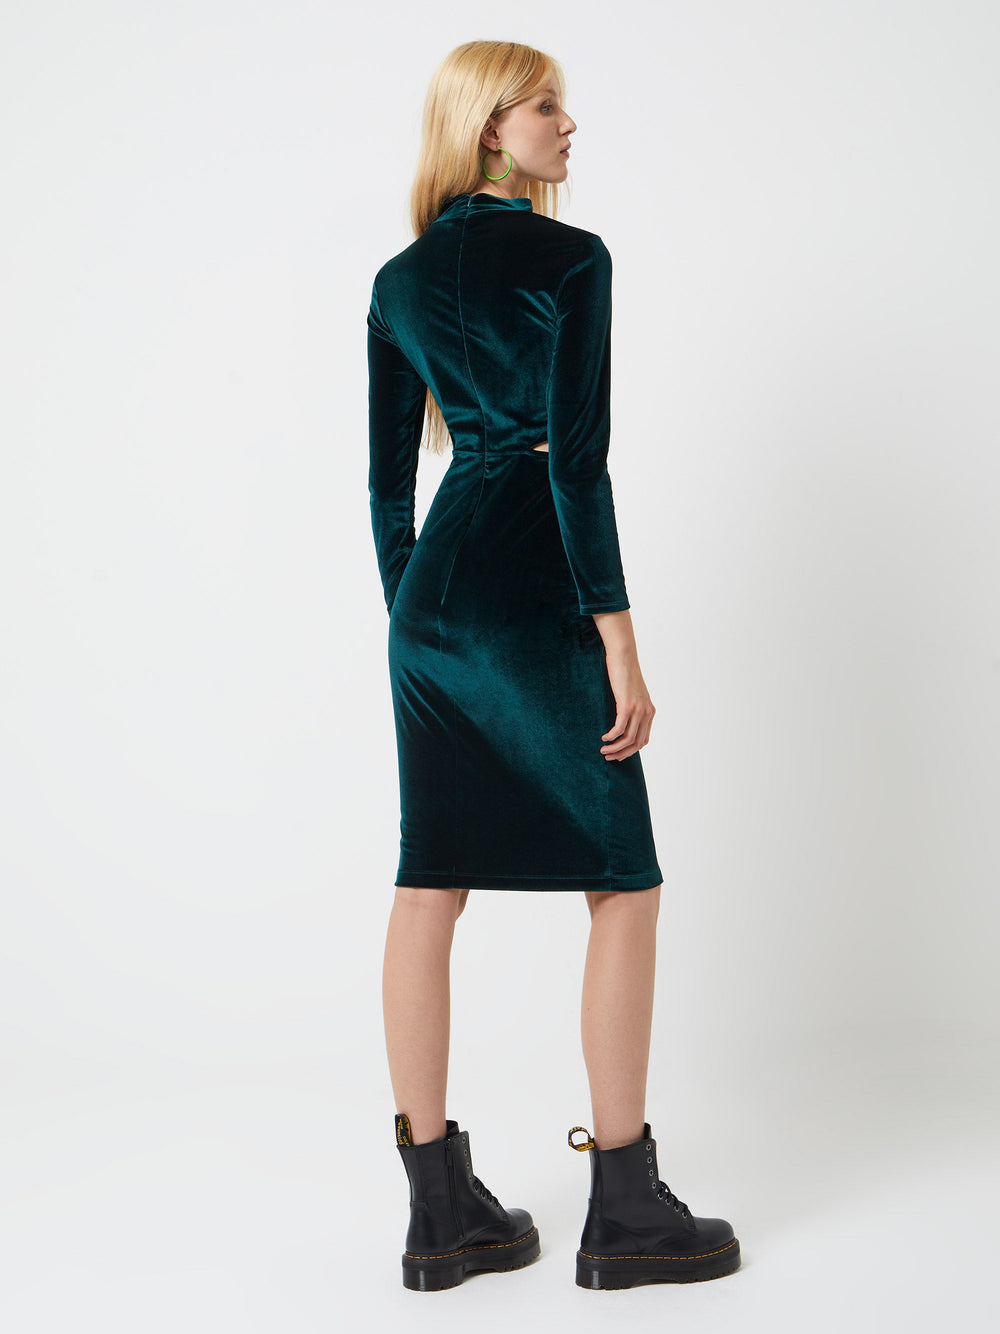 Sula Velvet Jersey Cut Out Dress | French Connection EU